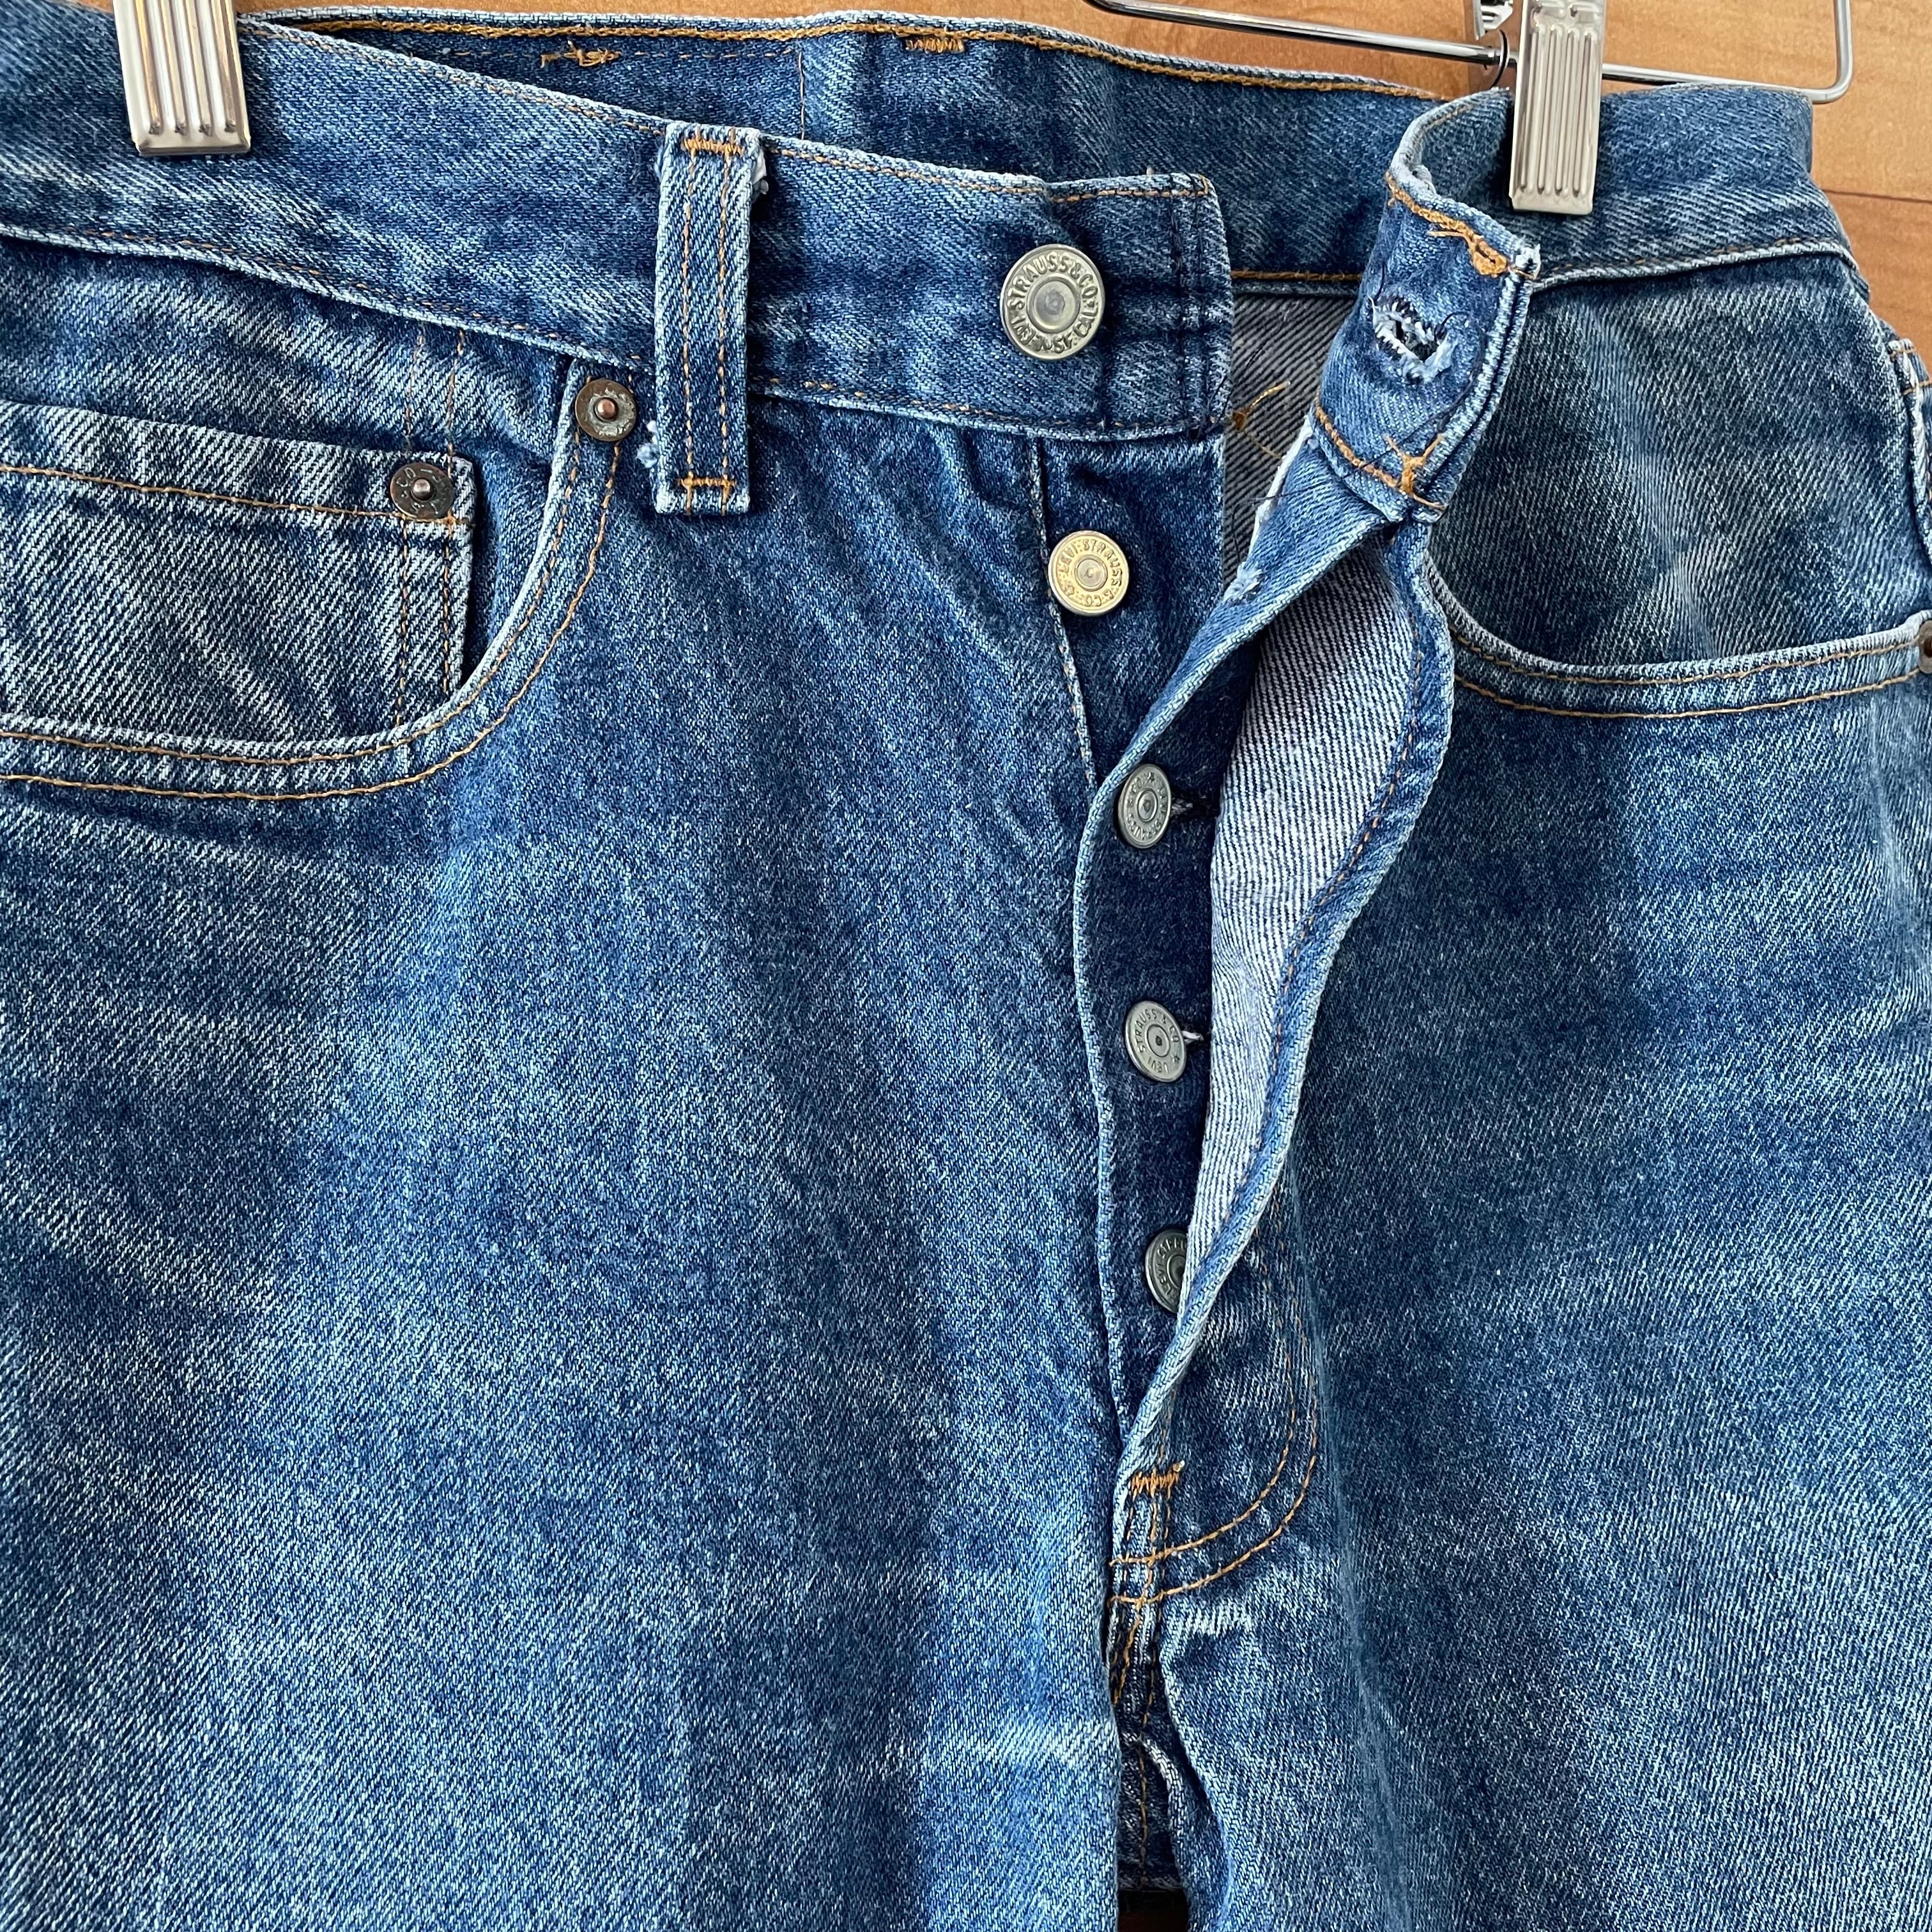 【LEVI'S】501 USA製 80年代 W30 L33 リーバイス アメリカ古着 | 古着屋手ぶらがbest powered by BASE